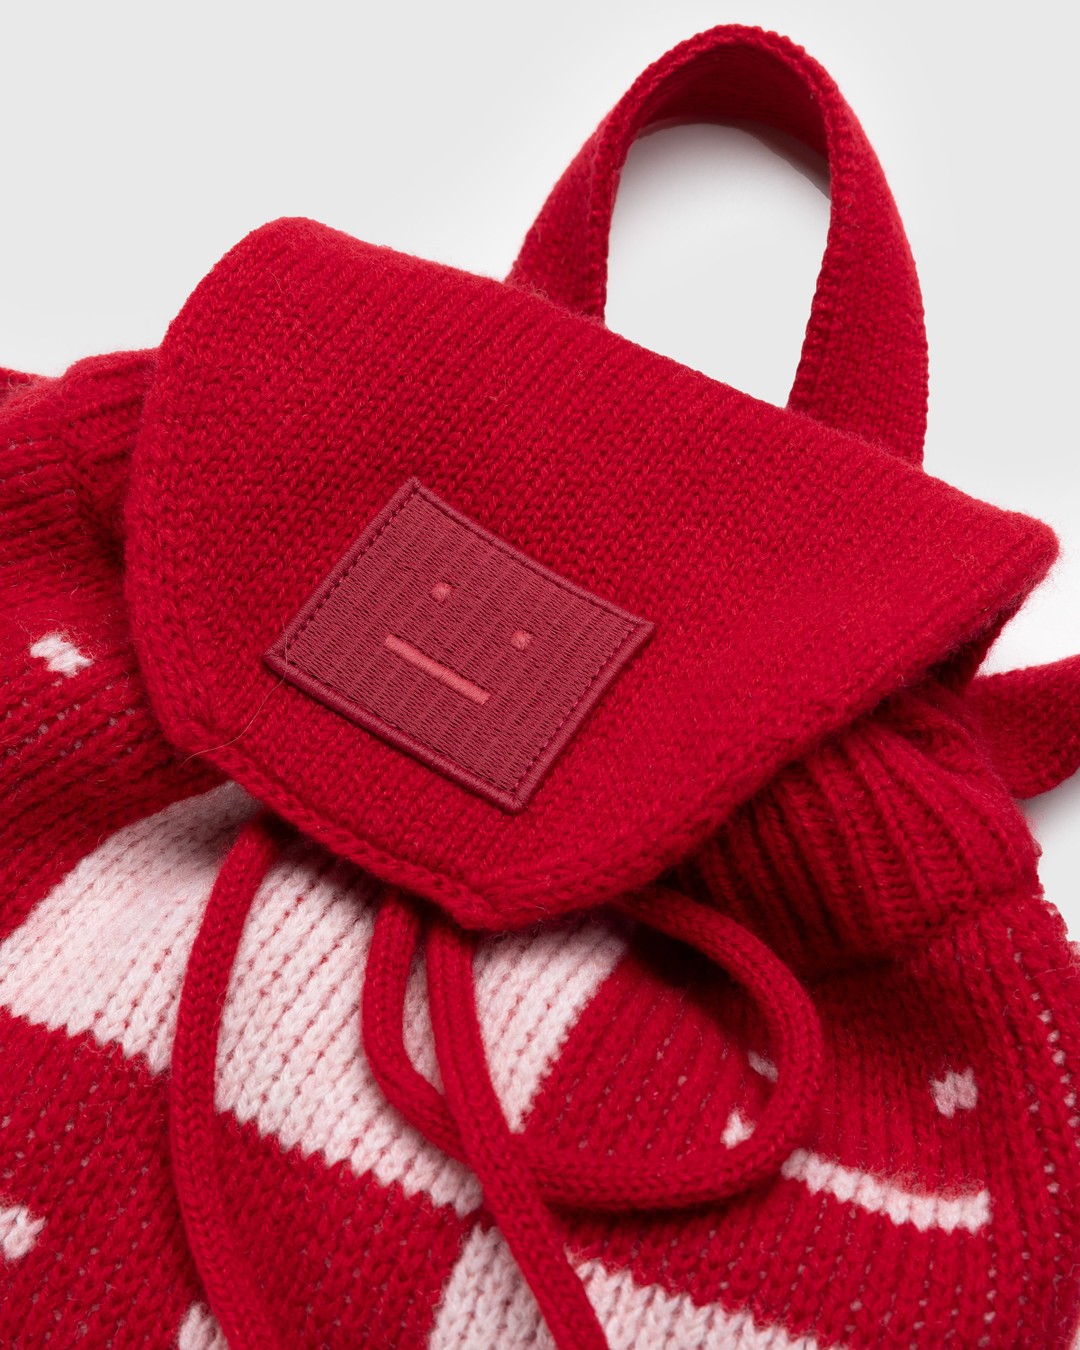 Acne Studios – Knit Face Backpack Deep Red/Faded Pink/Melange - Bags - Red - Image 3